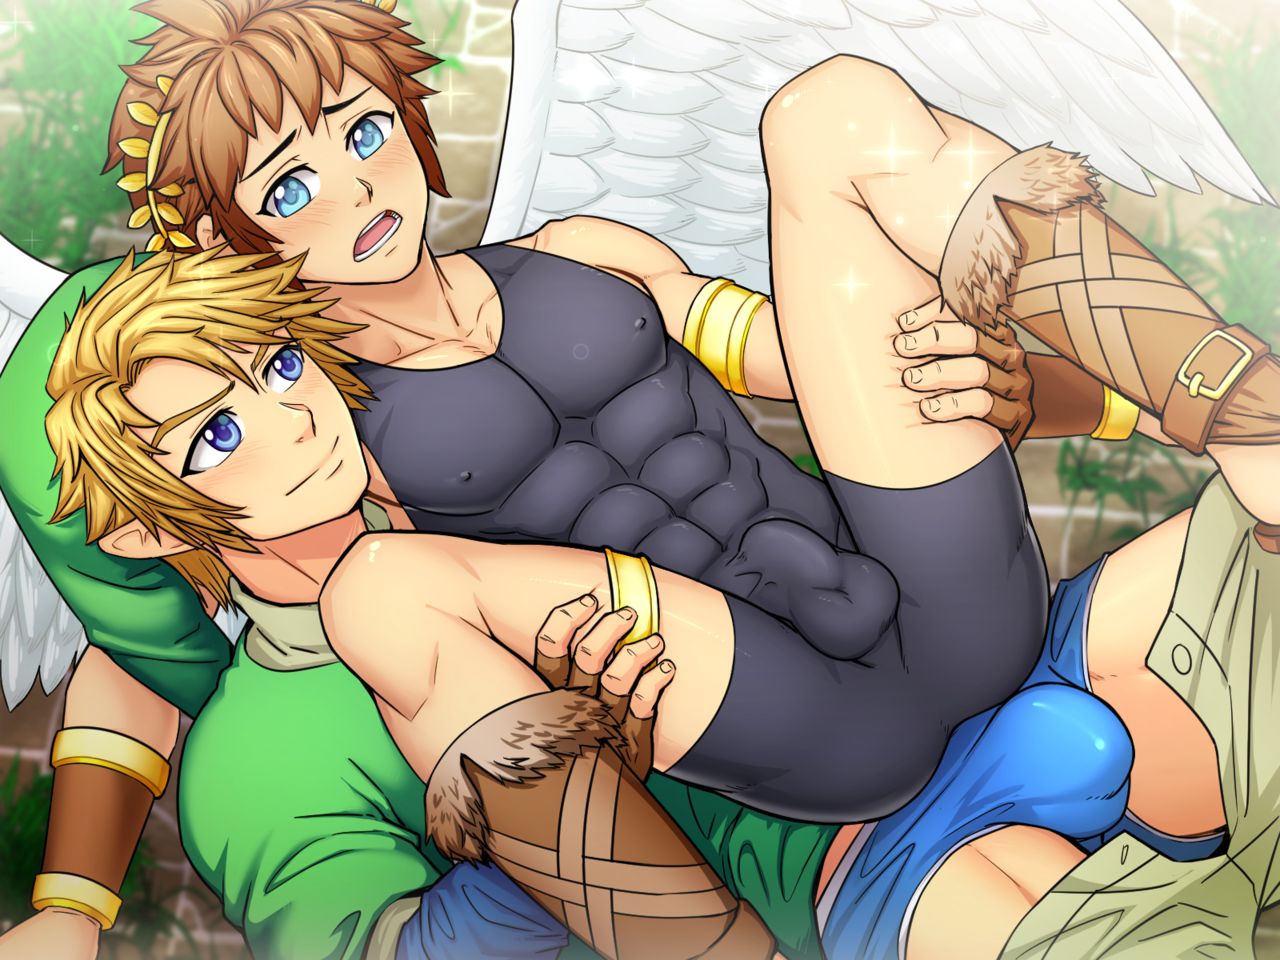 Read The[suiton00] Super Smash Bros Link X Pit 1 Hentai Online Porn Manga And Doujinshi